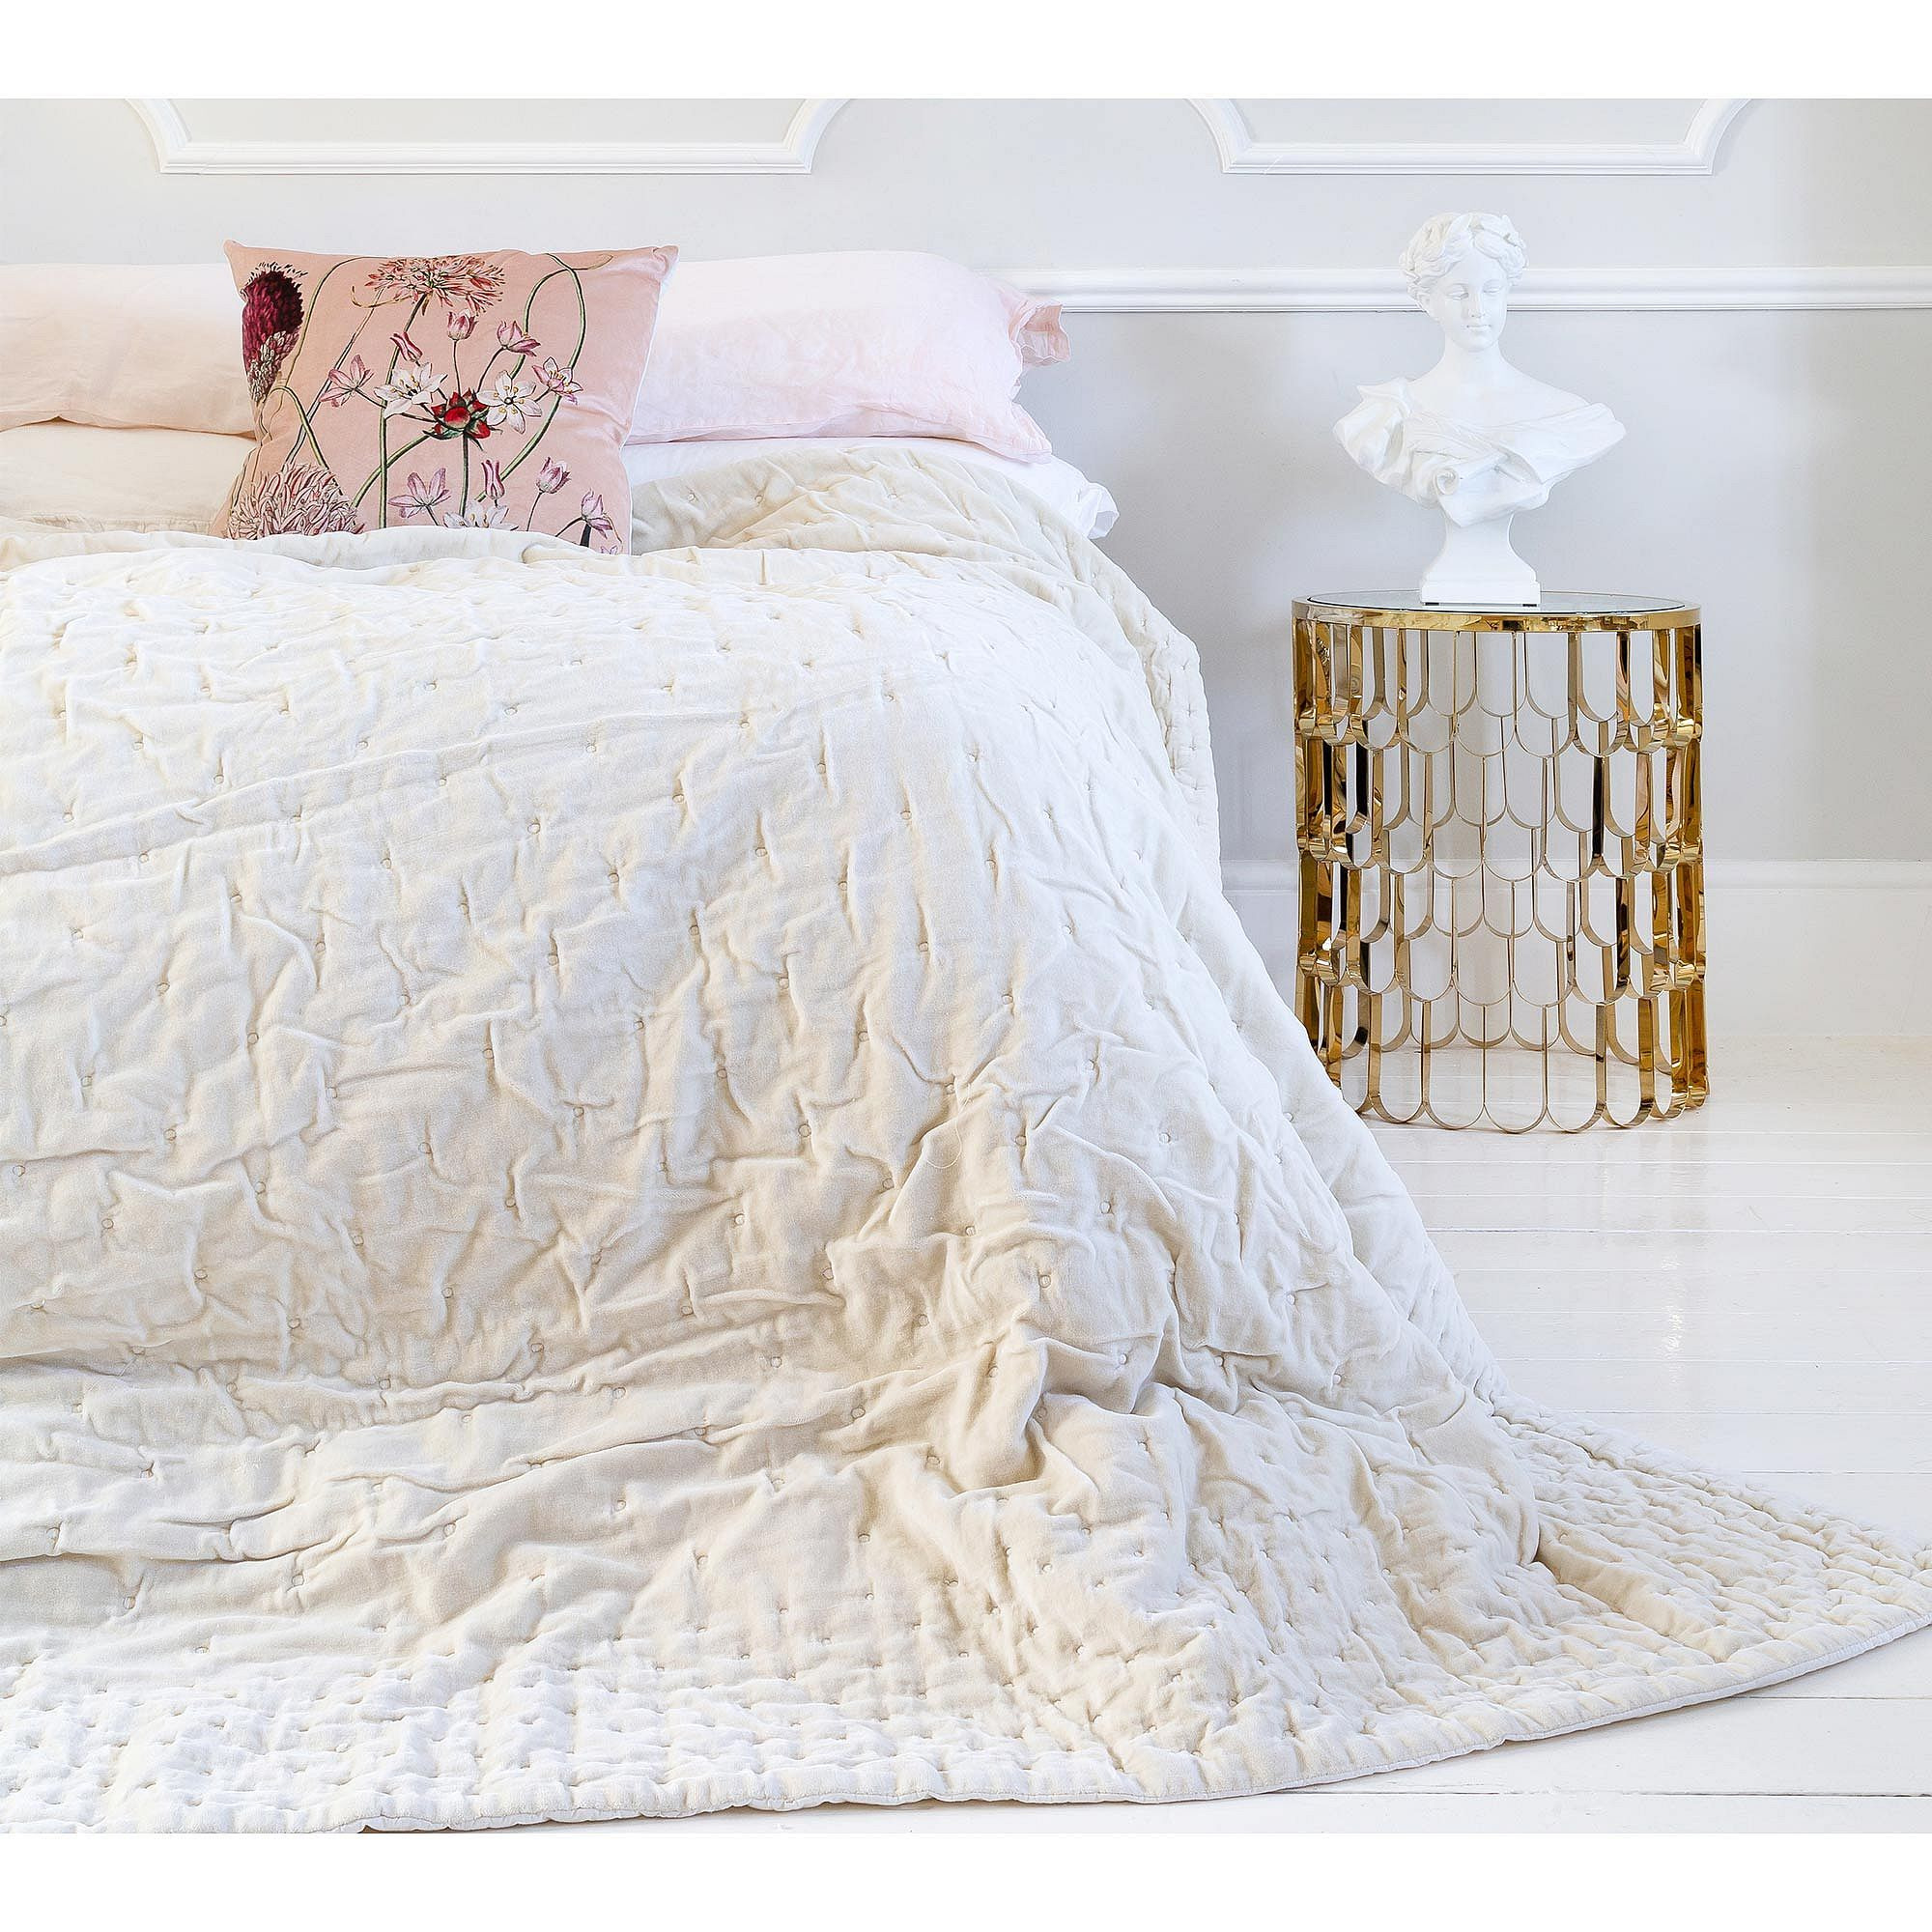 Plushious Ivory Cotton Velvet Quilted Bedspread (Petite) - image 1